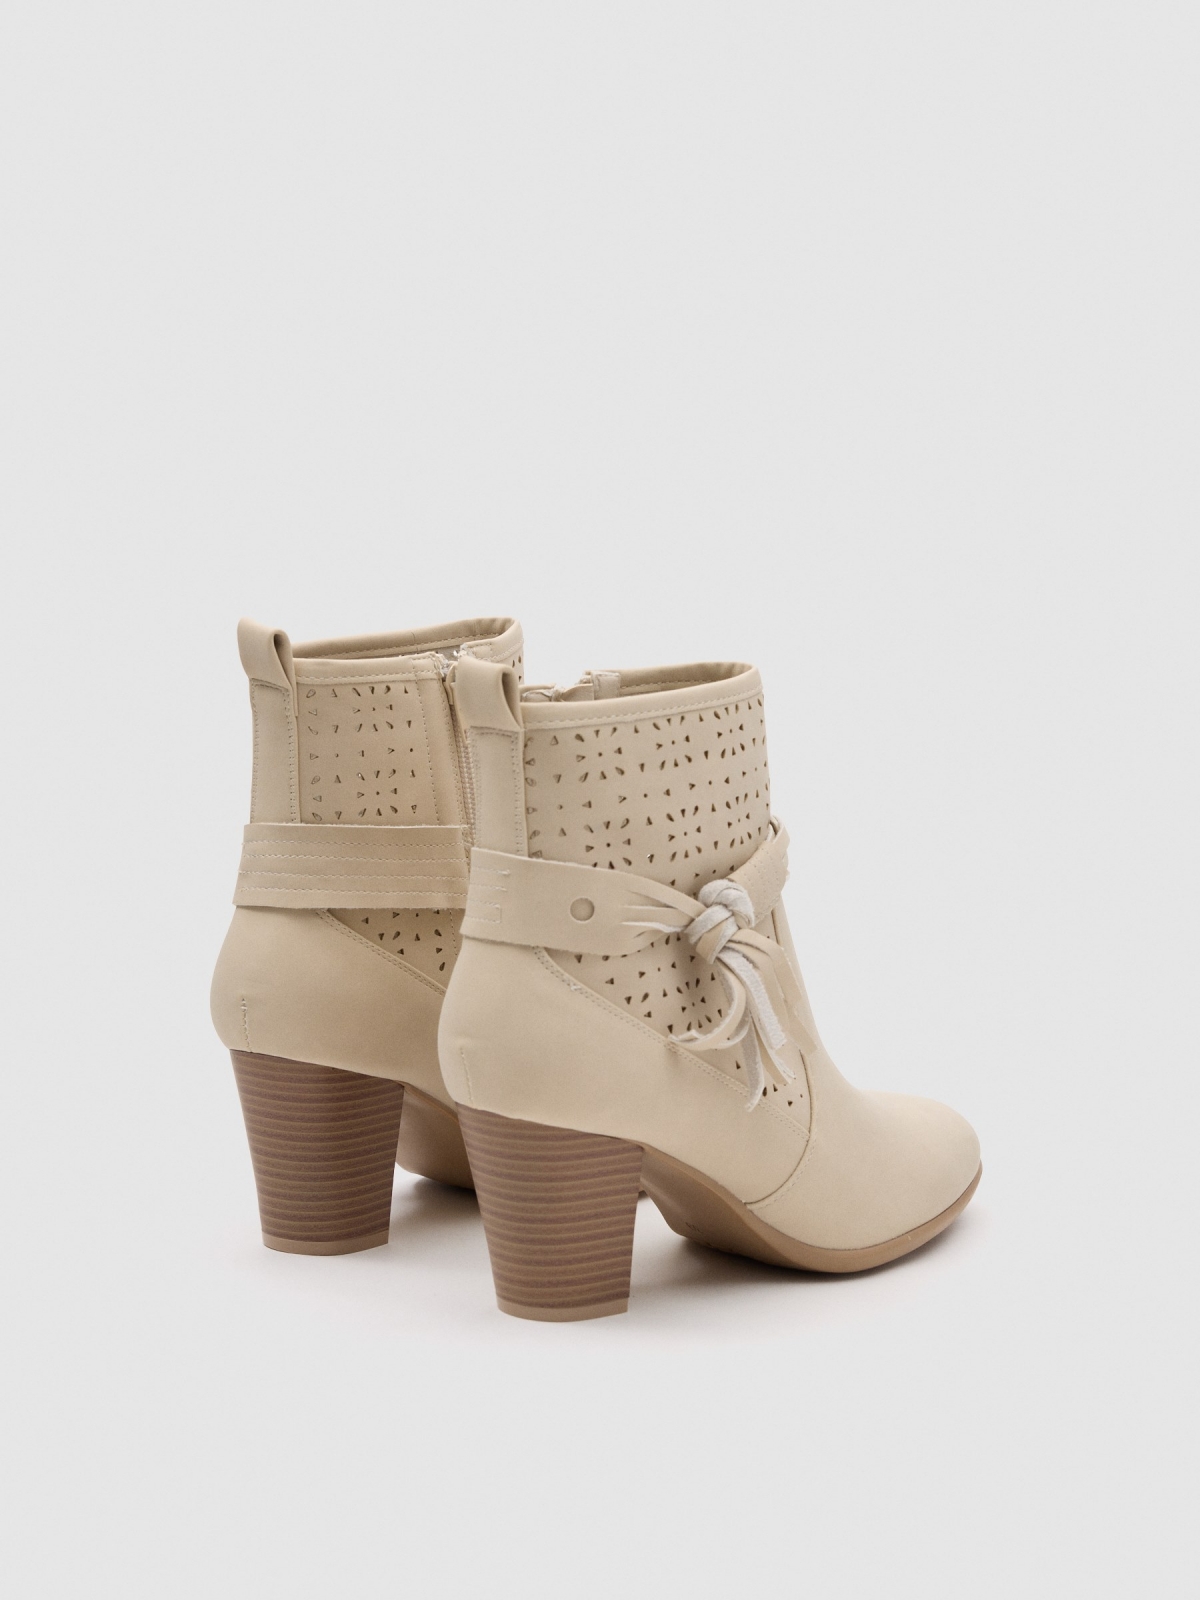 Cream leather-effect medium heel ankle boot with die-cut side bow sand 45º back view